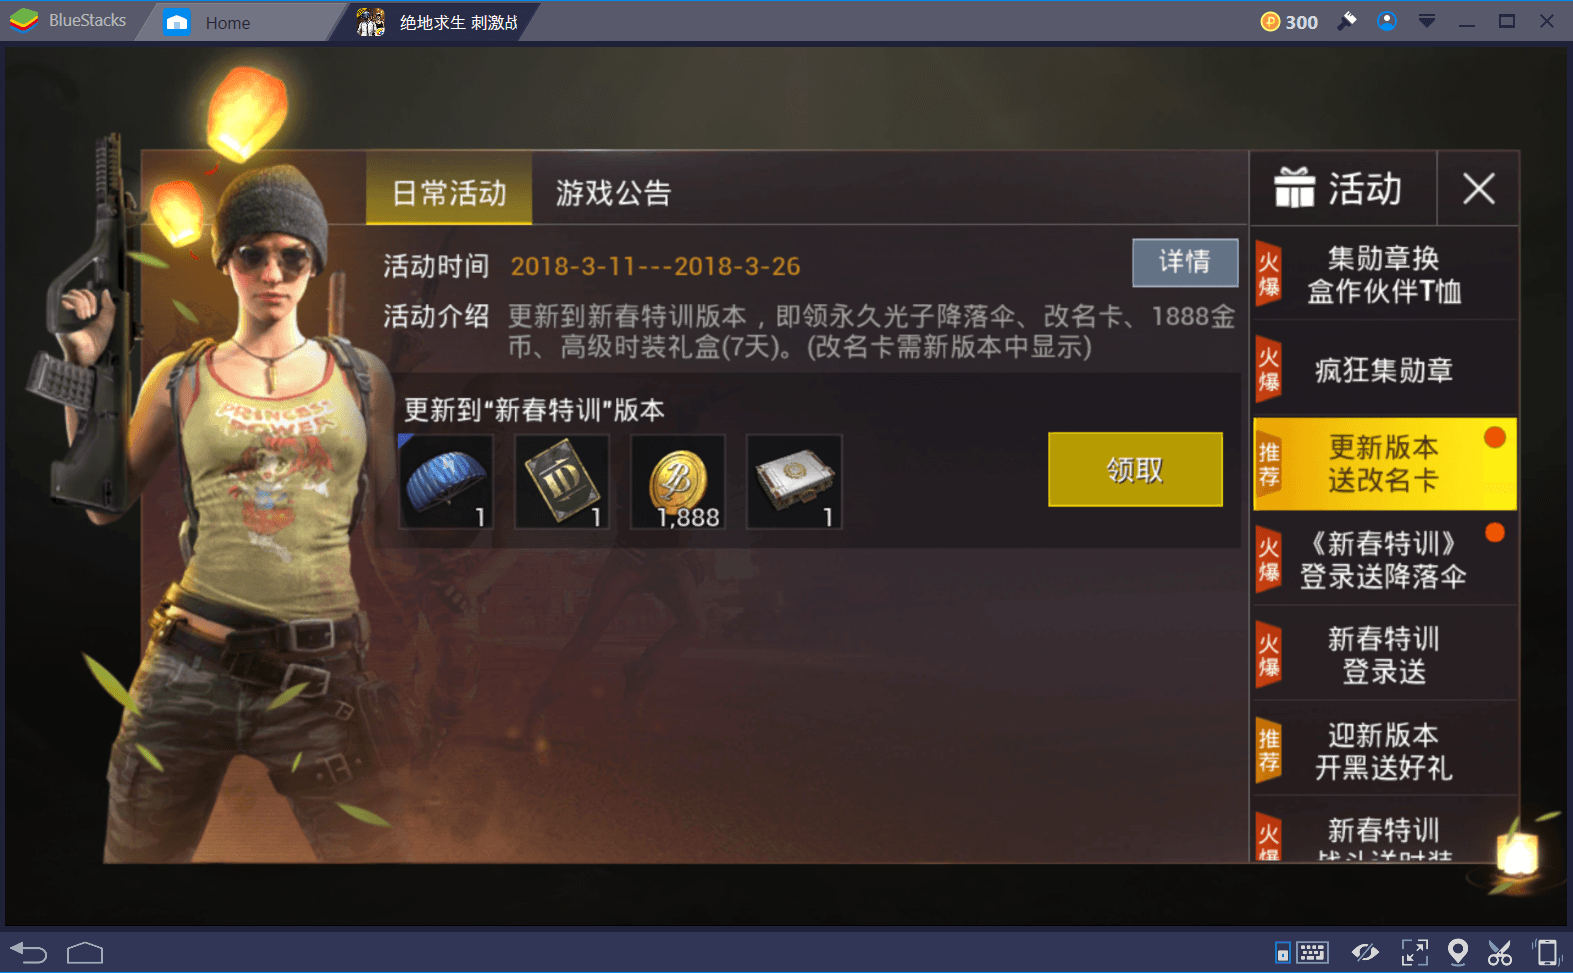 How To Navigate The Pubg Mobile Menu Without Knowing Chinese - pubg mobile rewards